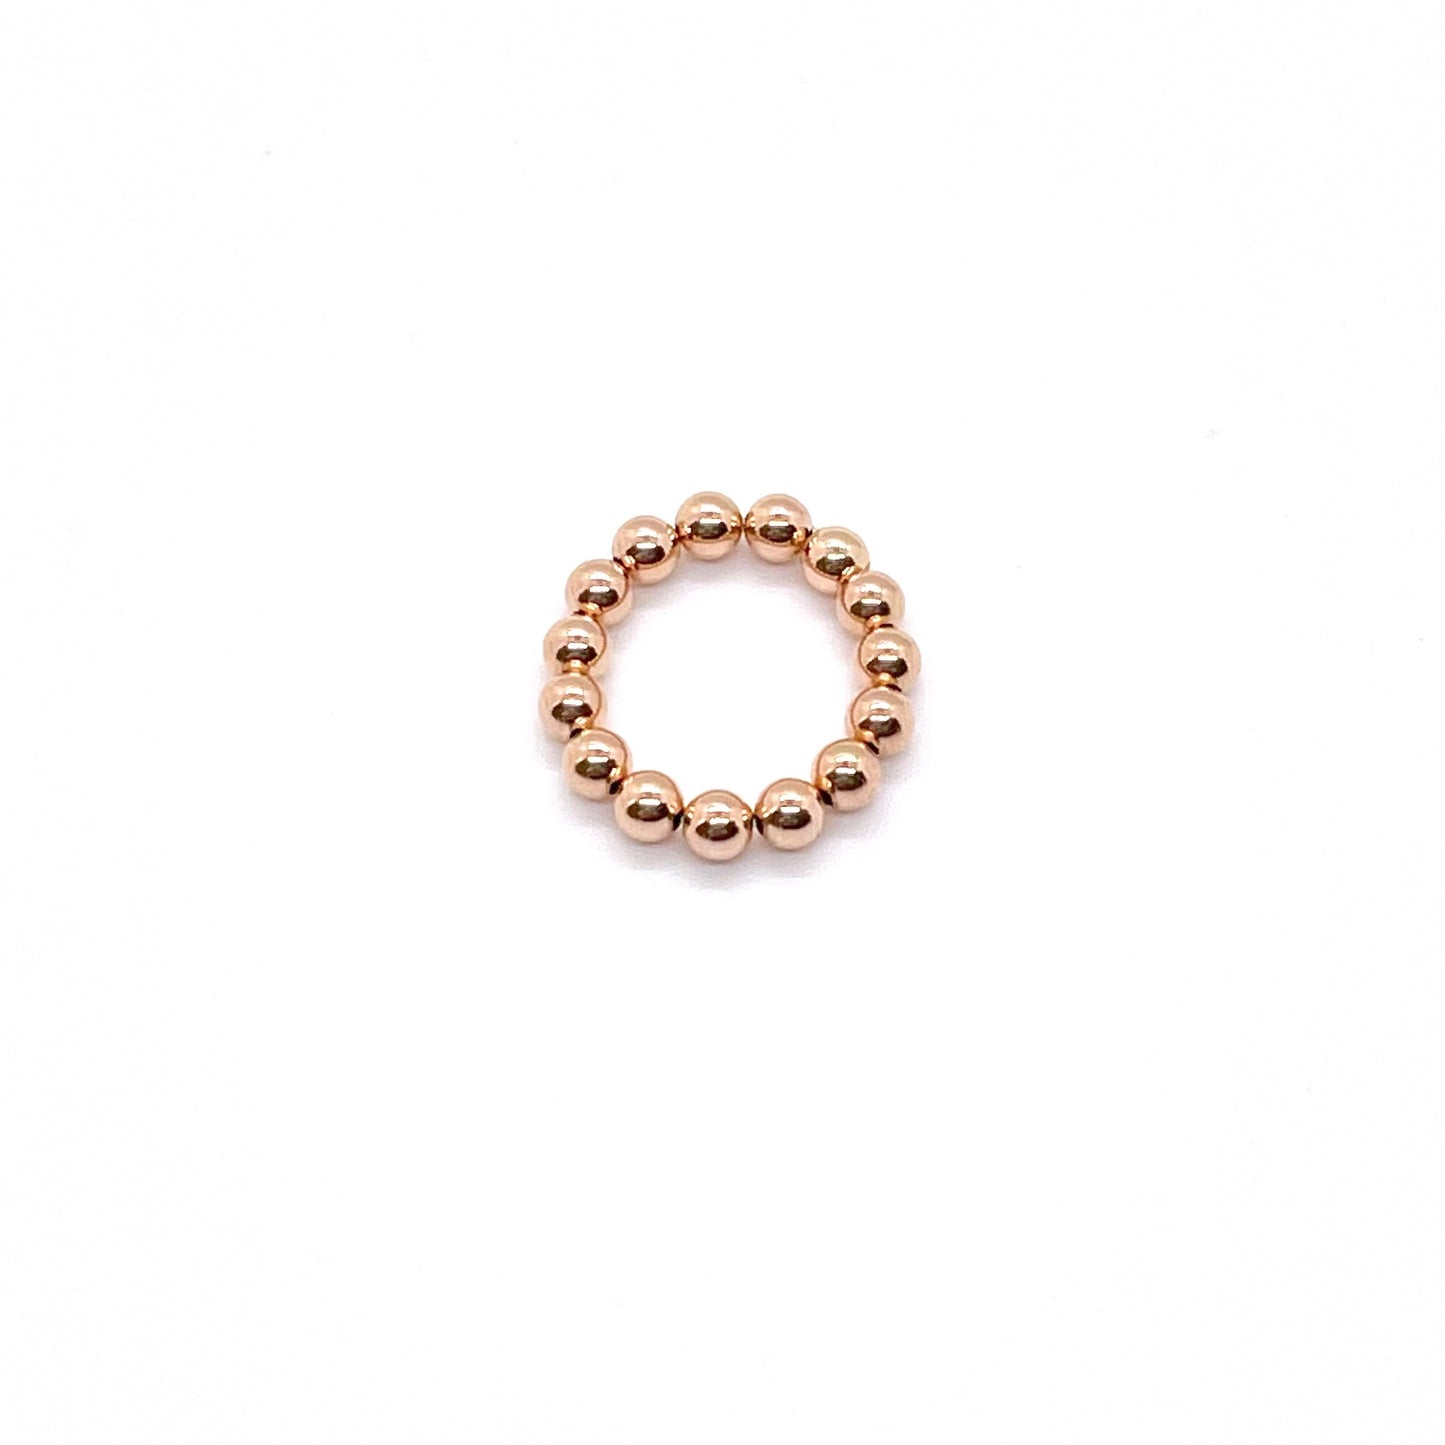 Gold bead ring with 4mm rose gold filled waterproof beads on elastic stretch cord.